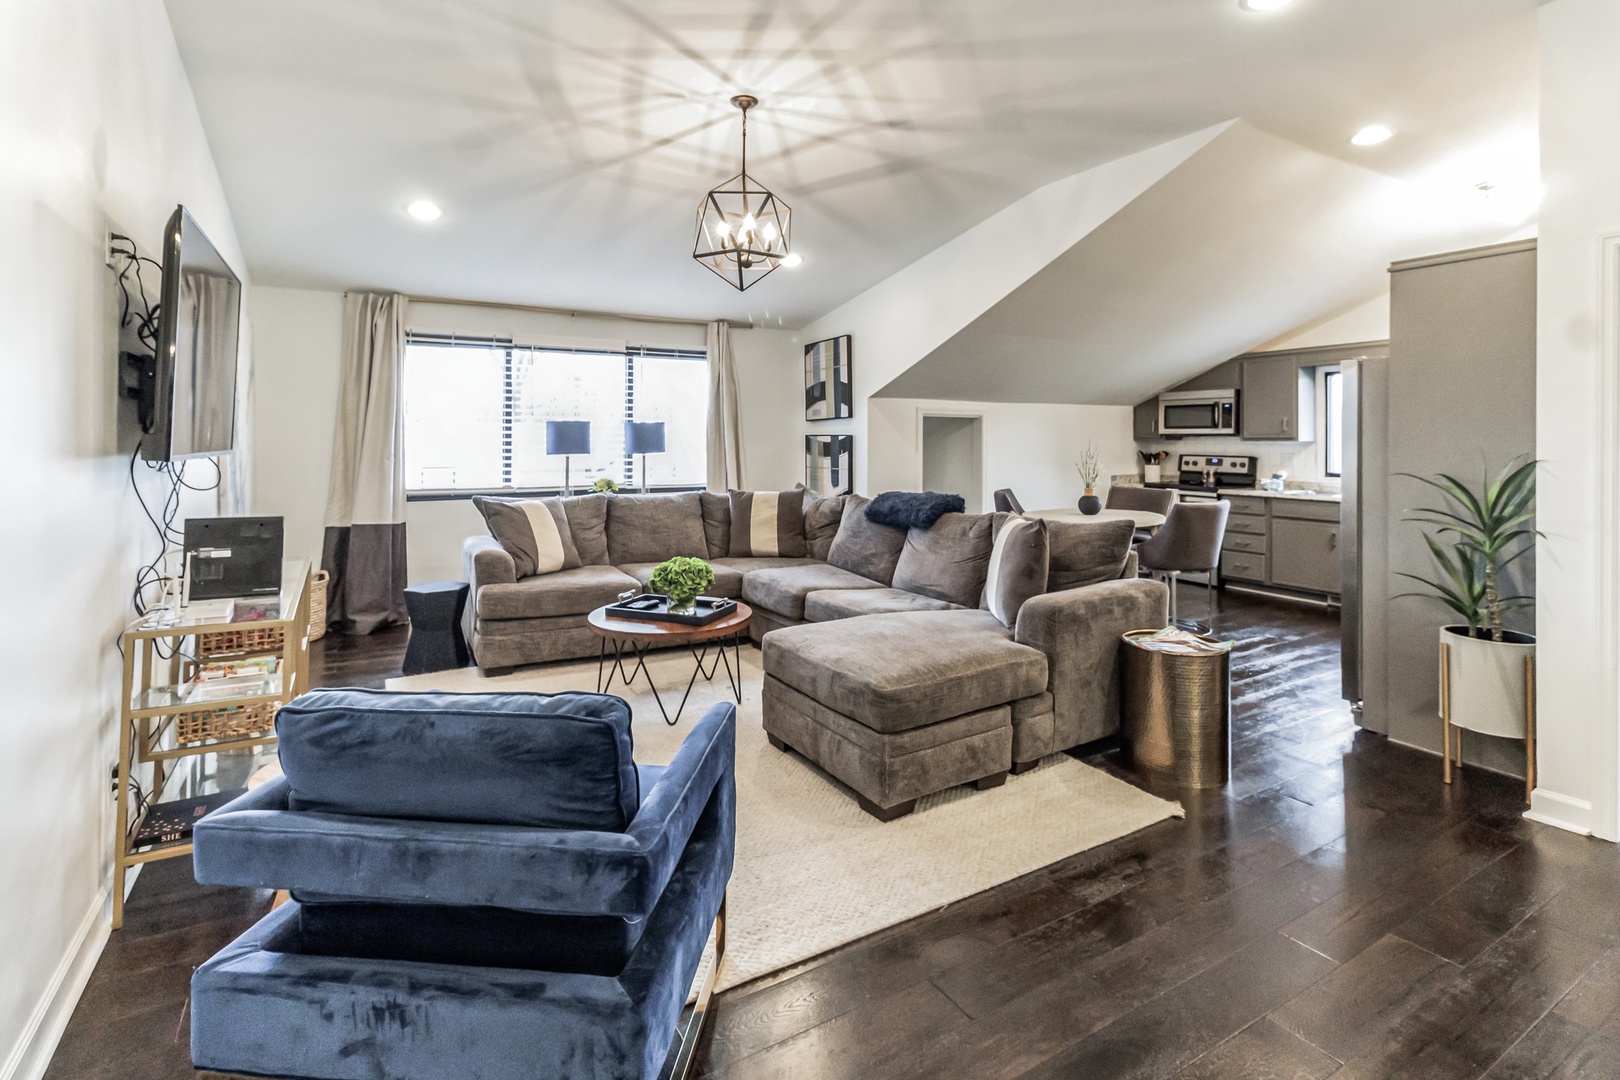 Unit C2: Head upstairs to kick back & relax in the cozy, updated living spaces